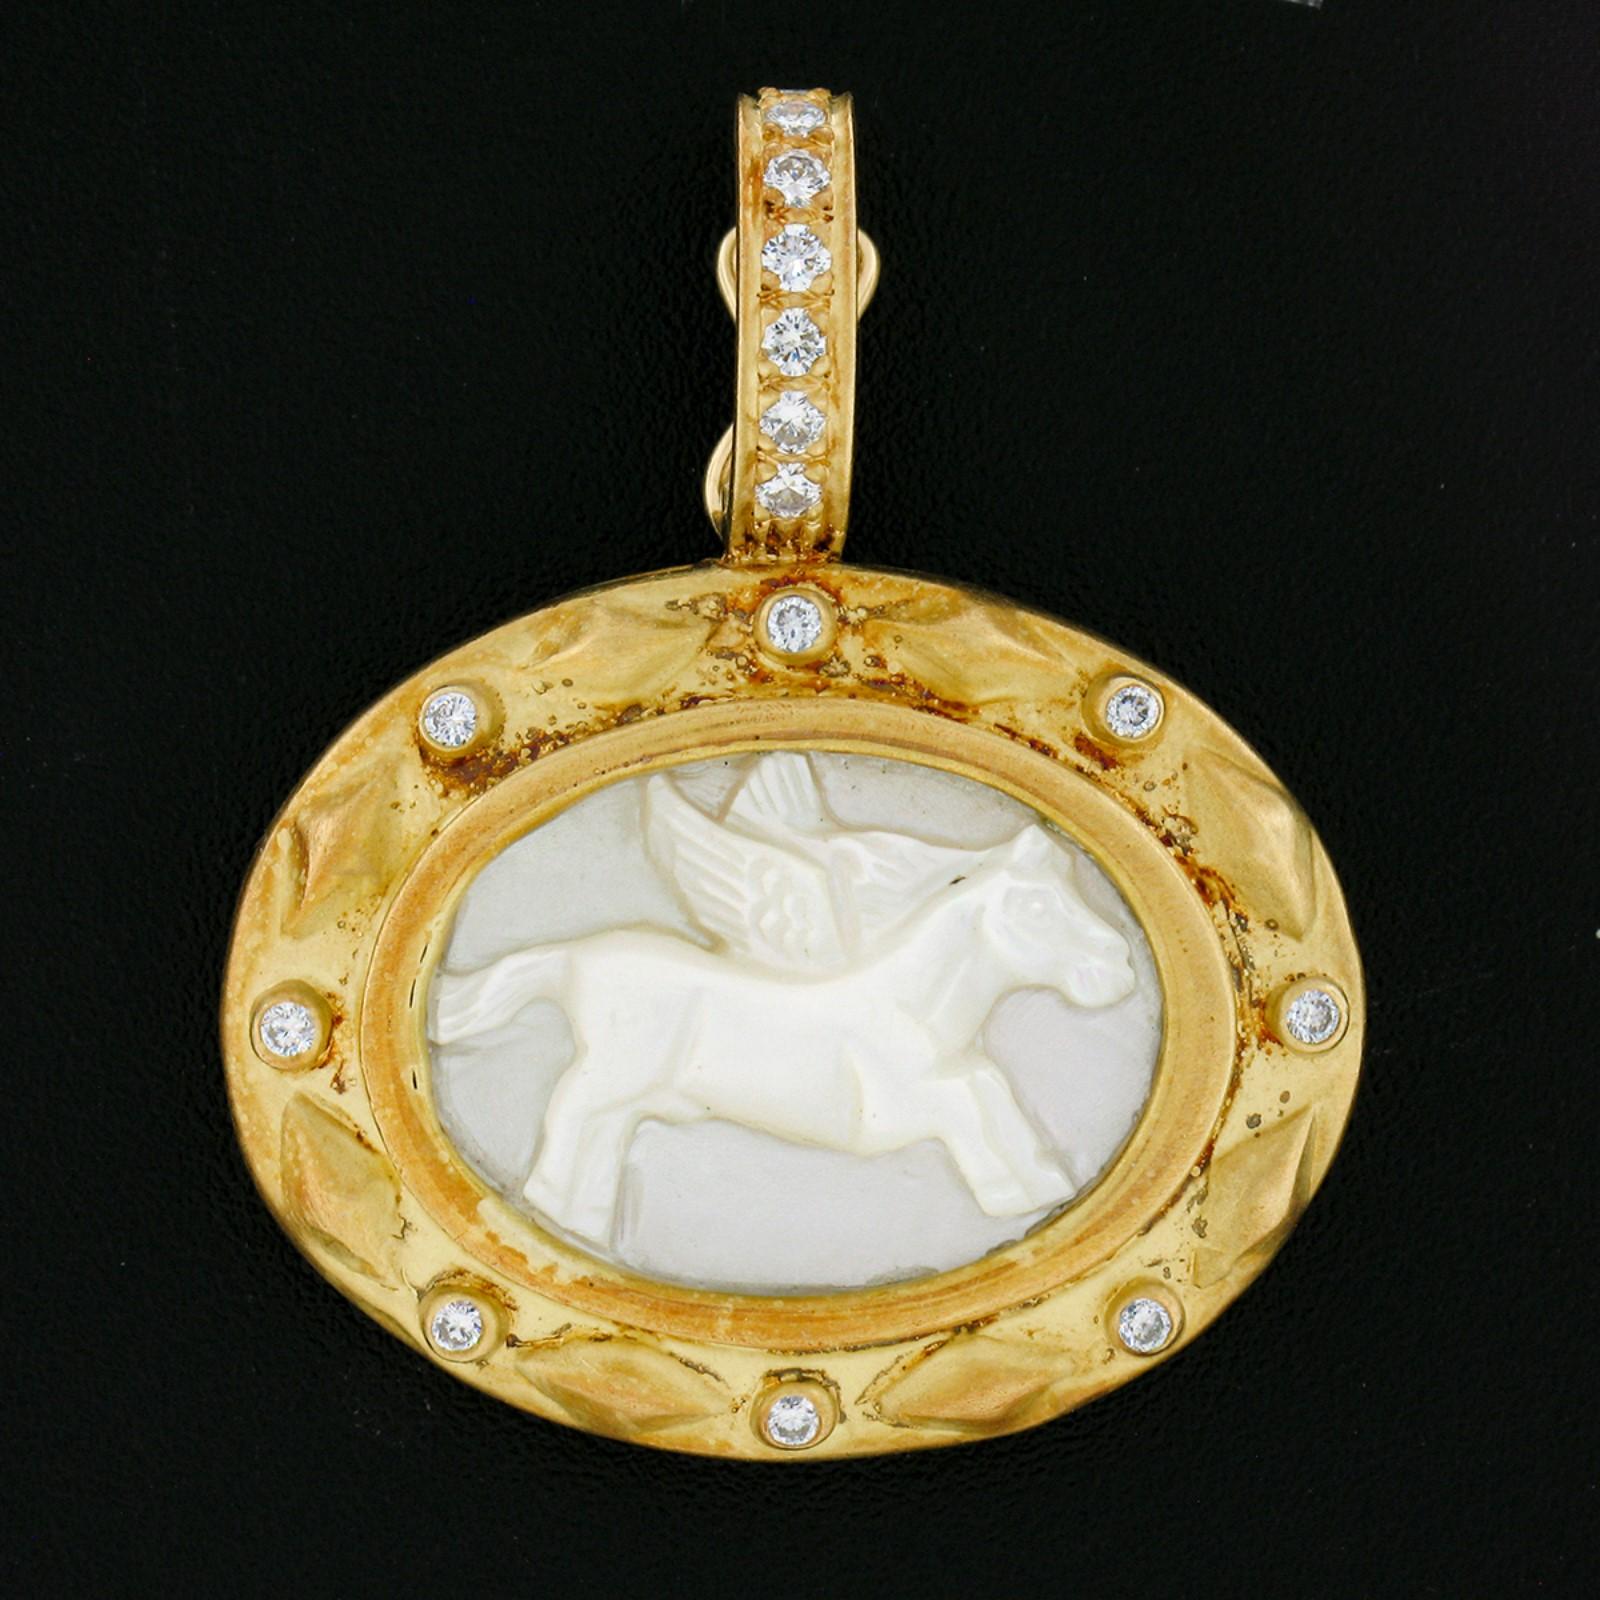 This wonderful enhancer pendant is crafted from solid 18k yellow gold and features a genuine mother of pearl stone that has been masterfully carved into showing a lovely and detailed winged horse at its center. The oval mother of pearl is neatly